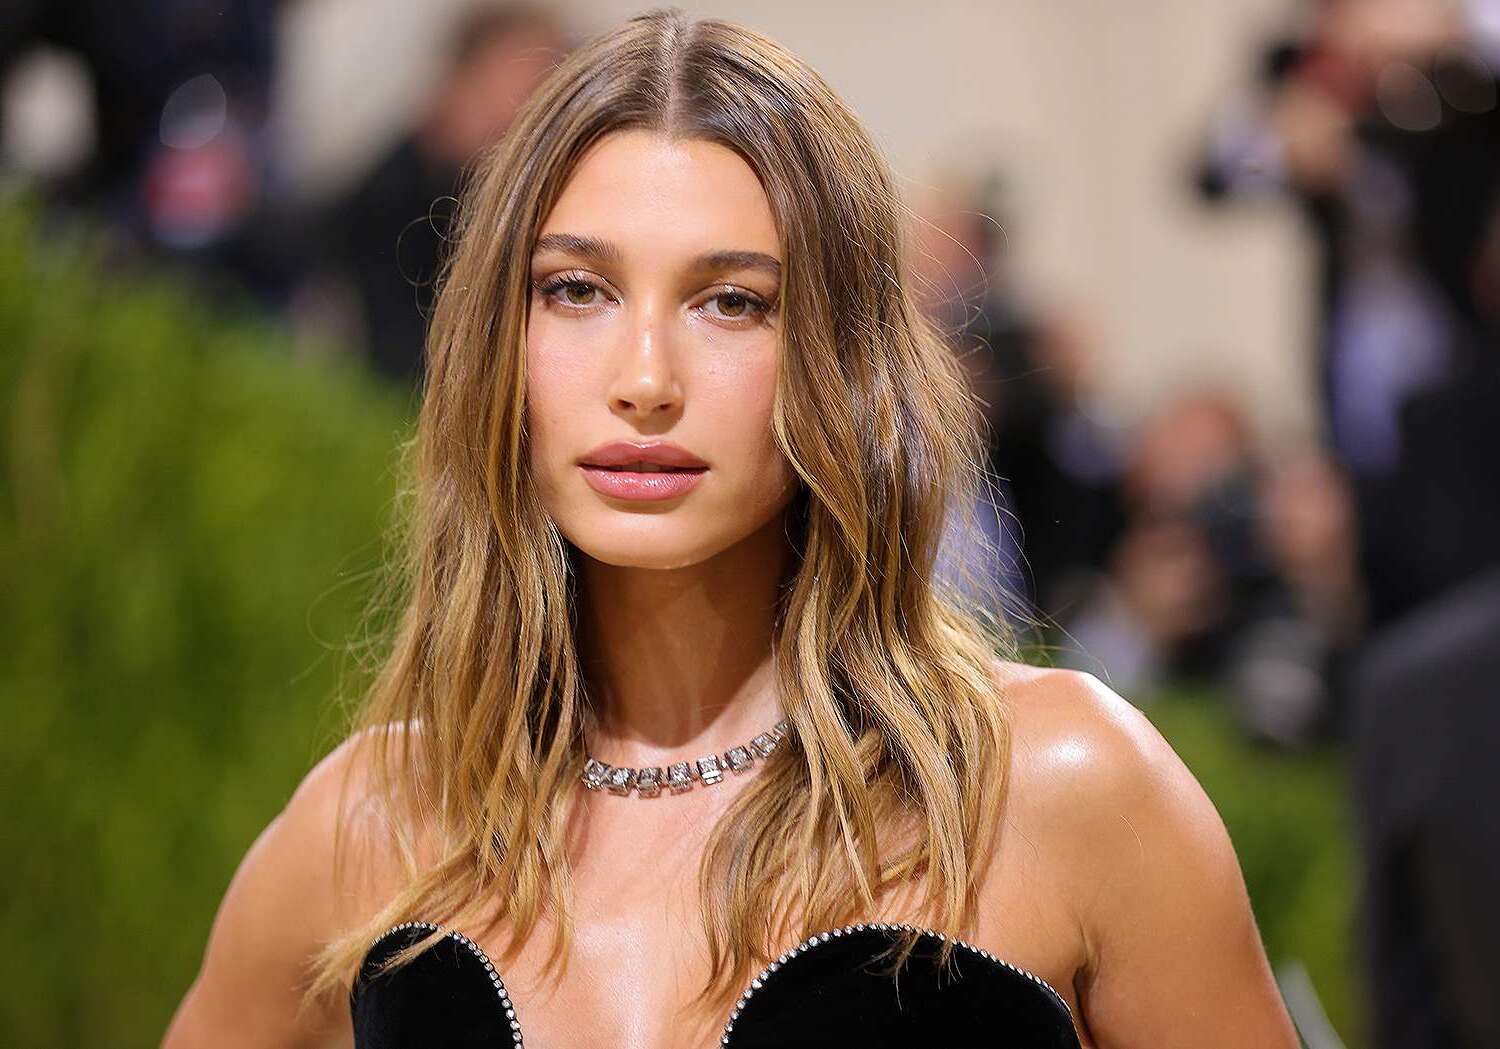 Hailey Bieber Upset With Father Stephen Baldwin's Public Request For Prayers